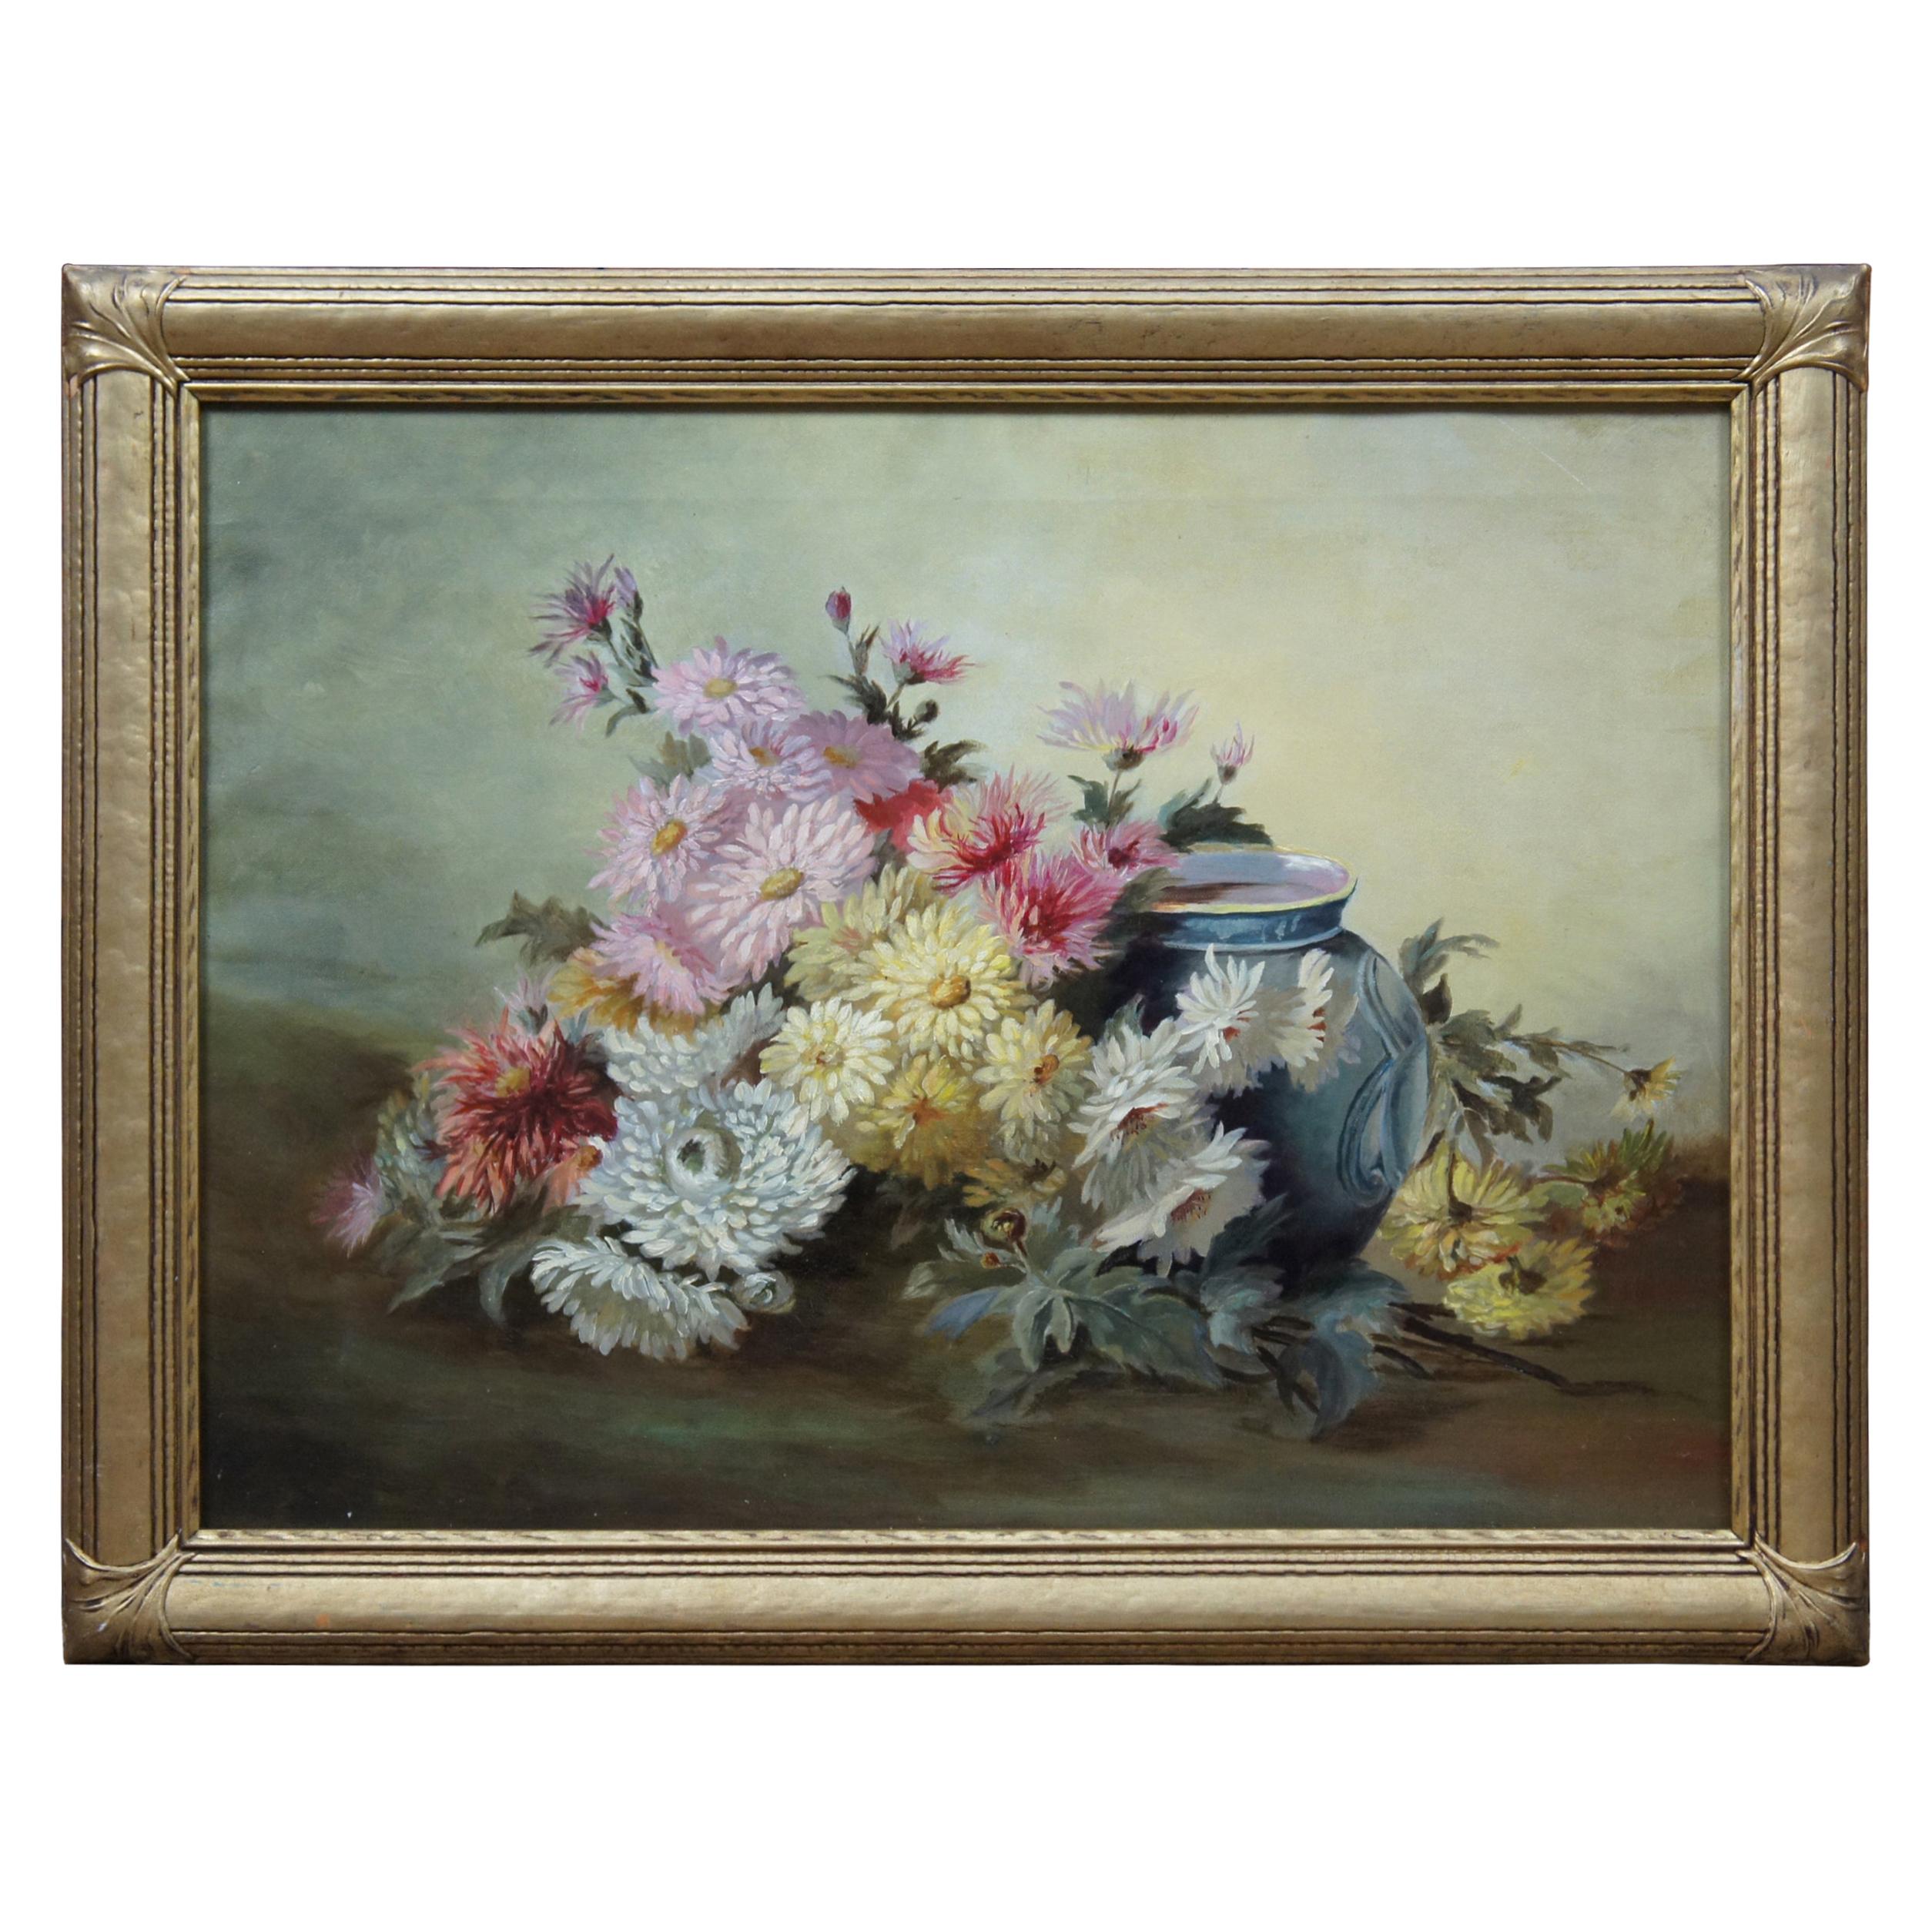 Antique Still Life Oil Painting Peony Flowers and Vase Victorian Realism Framed